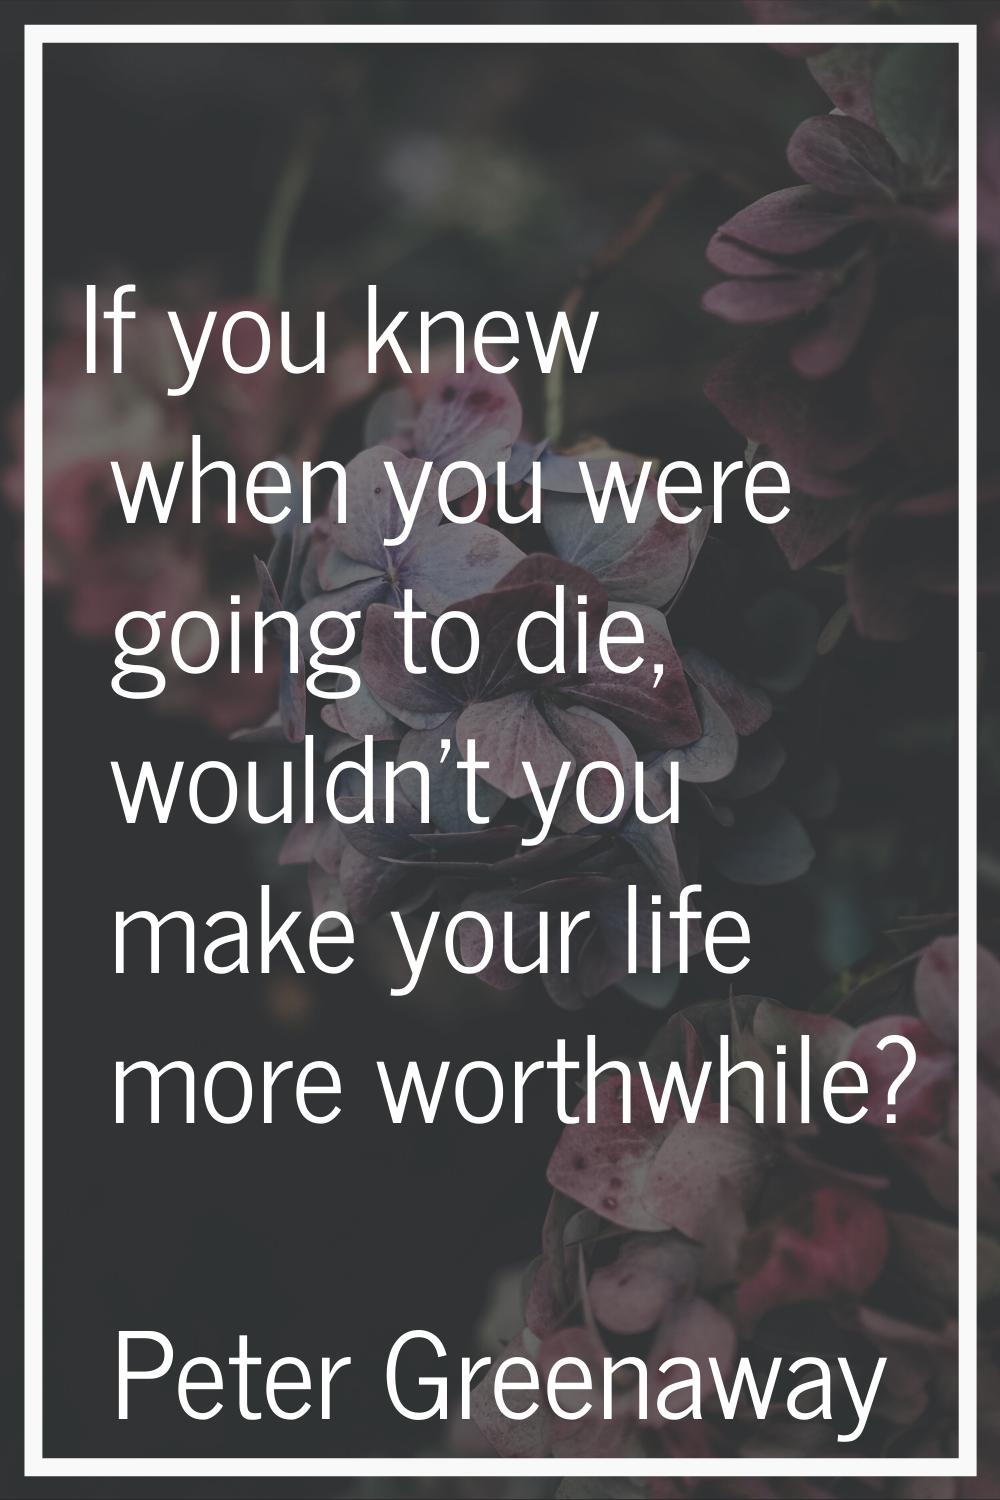 If you knew when you were going to die, wouldn't you make your life more worthwhile?